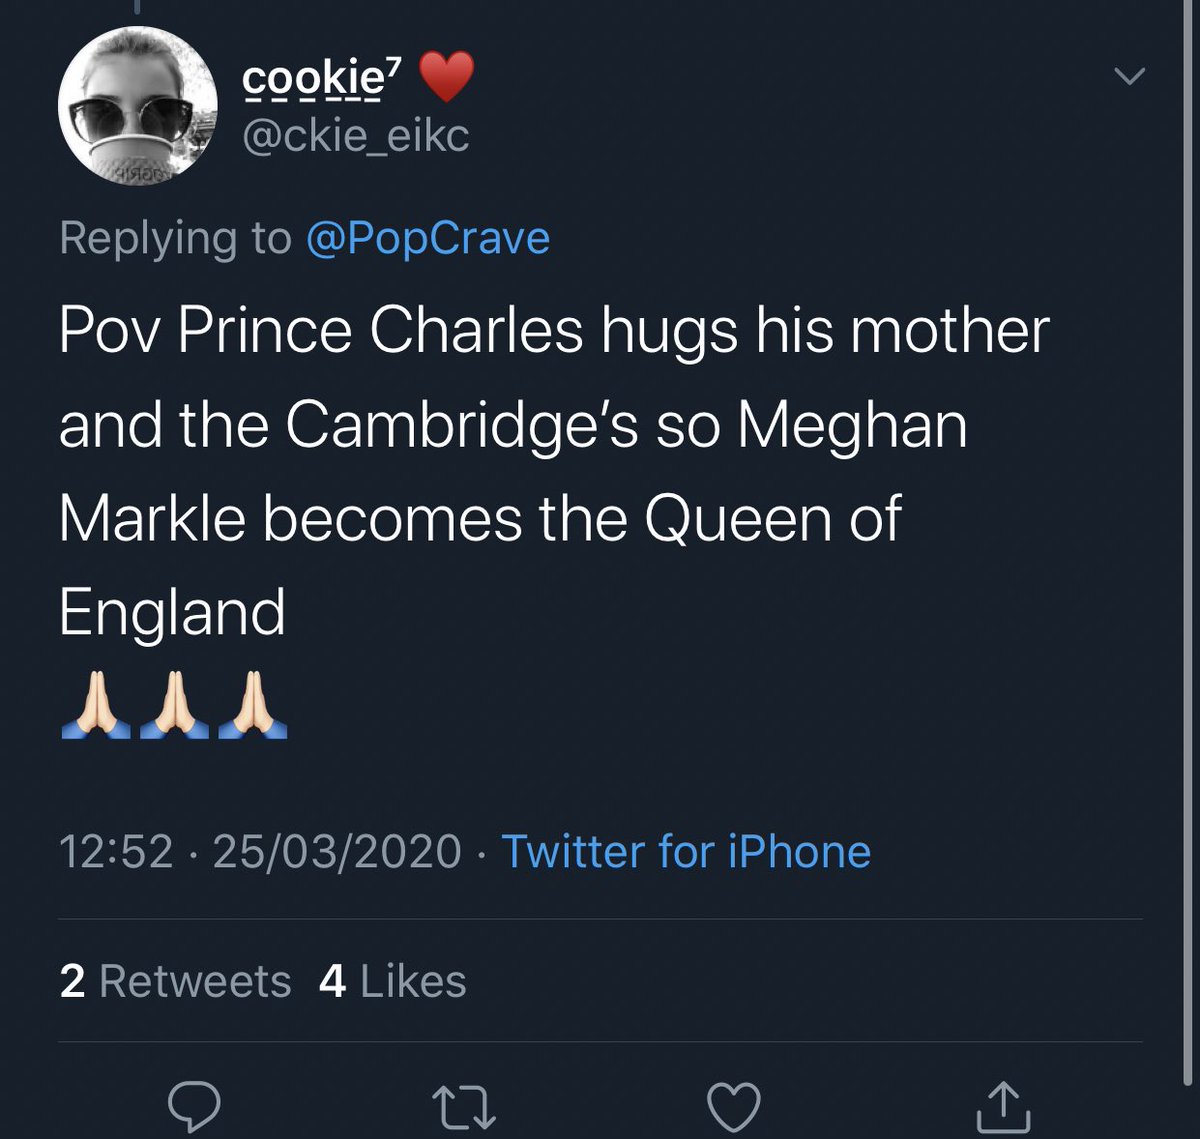 (40/40) hoping the Cambridge’s and the queen get the coronavirus so Meghan can be queen